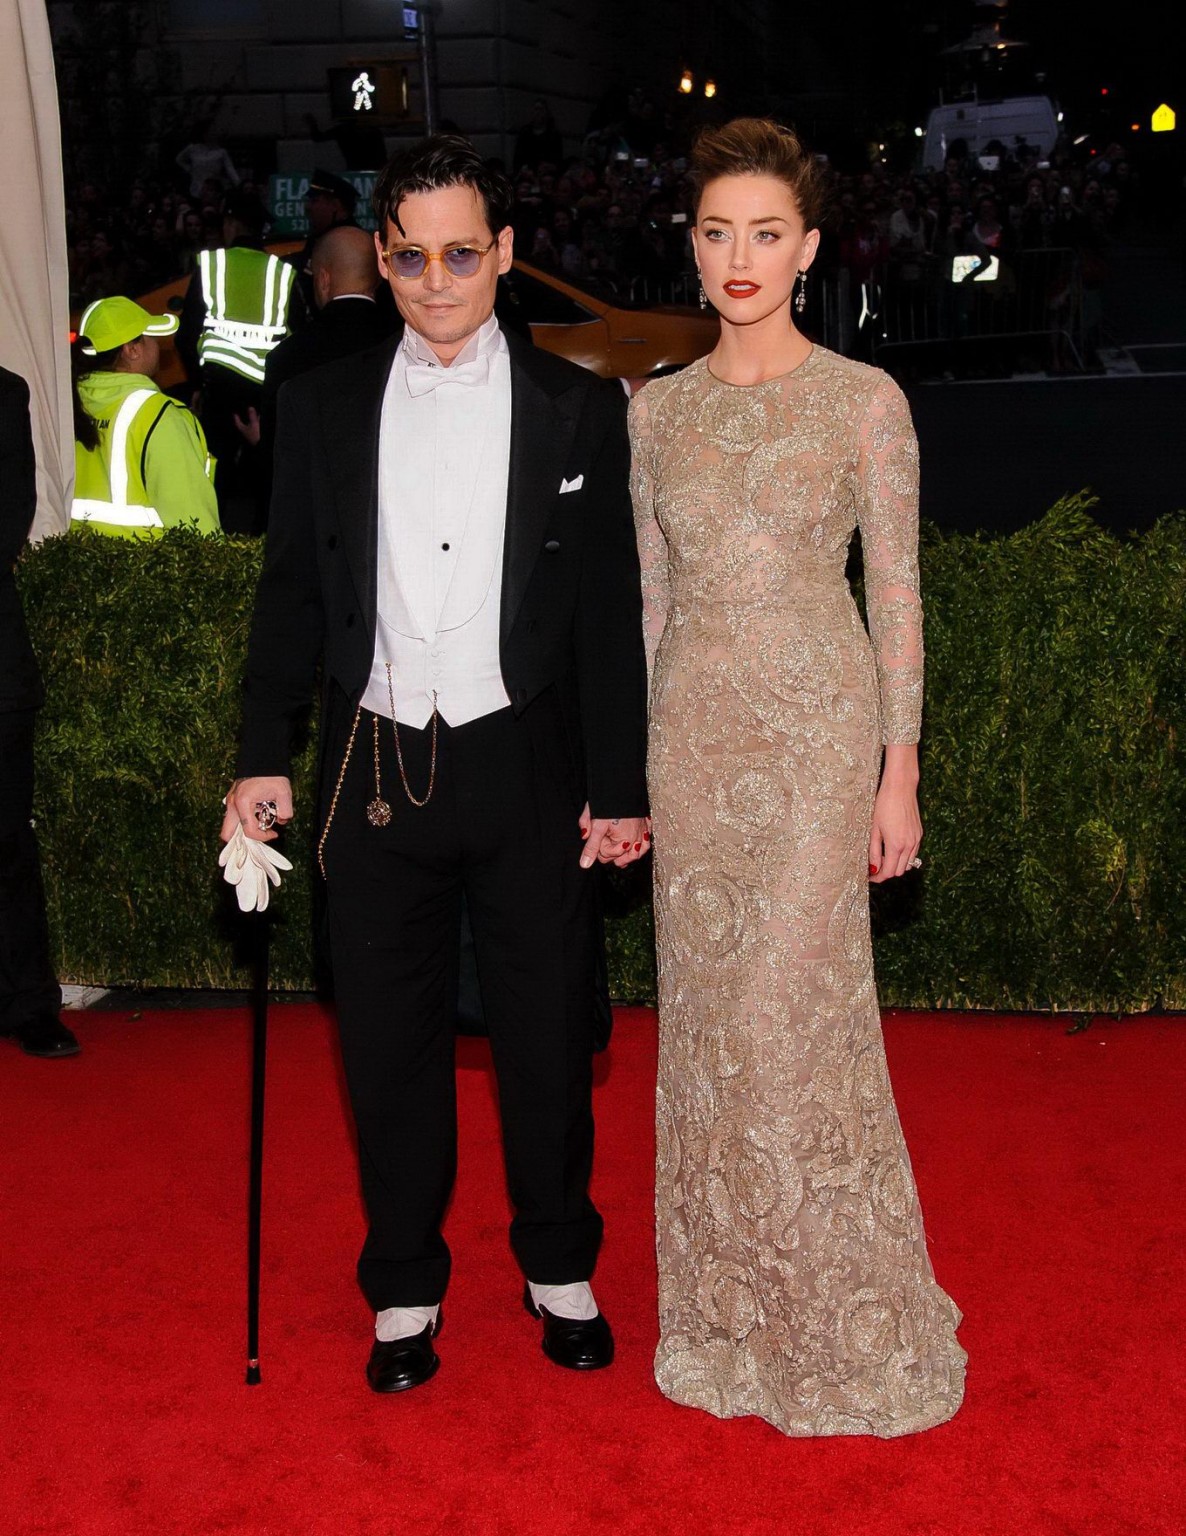 Amber Heard braless wearing a see through dress at the 2014 Met Gala in NY